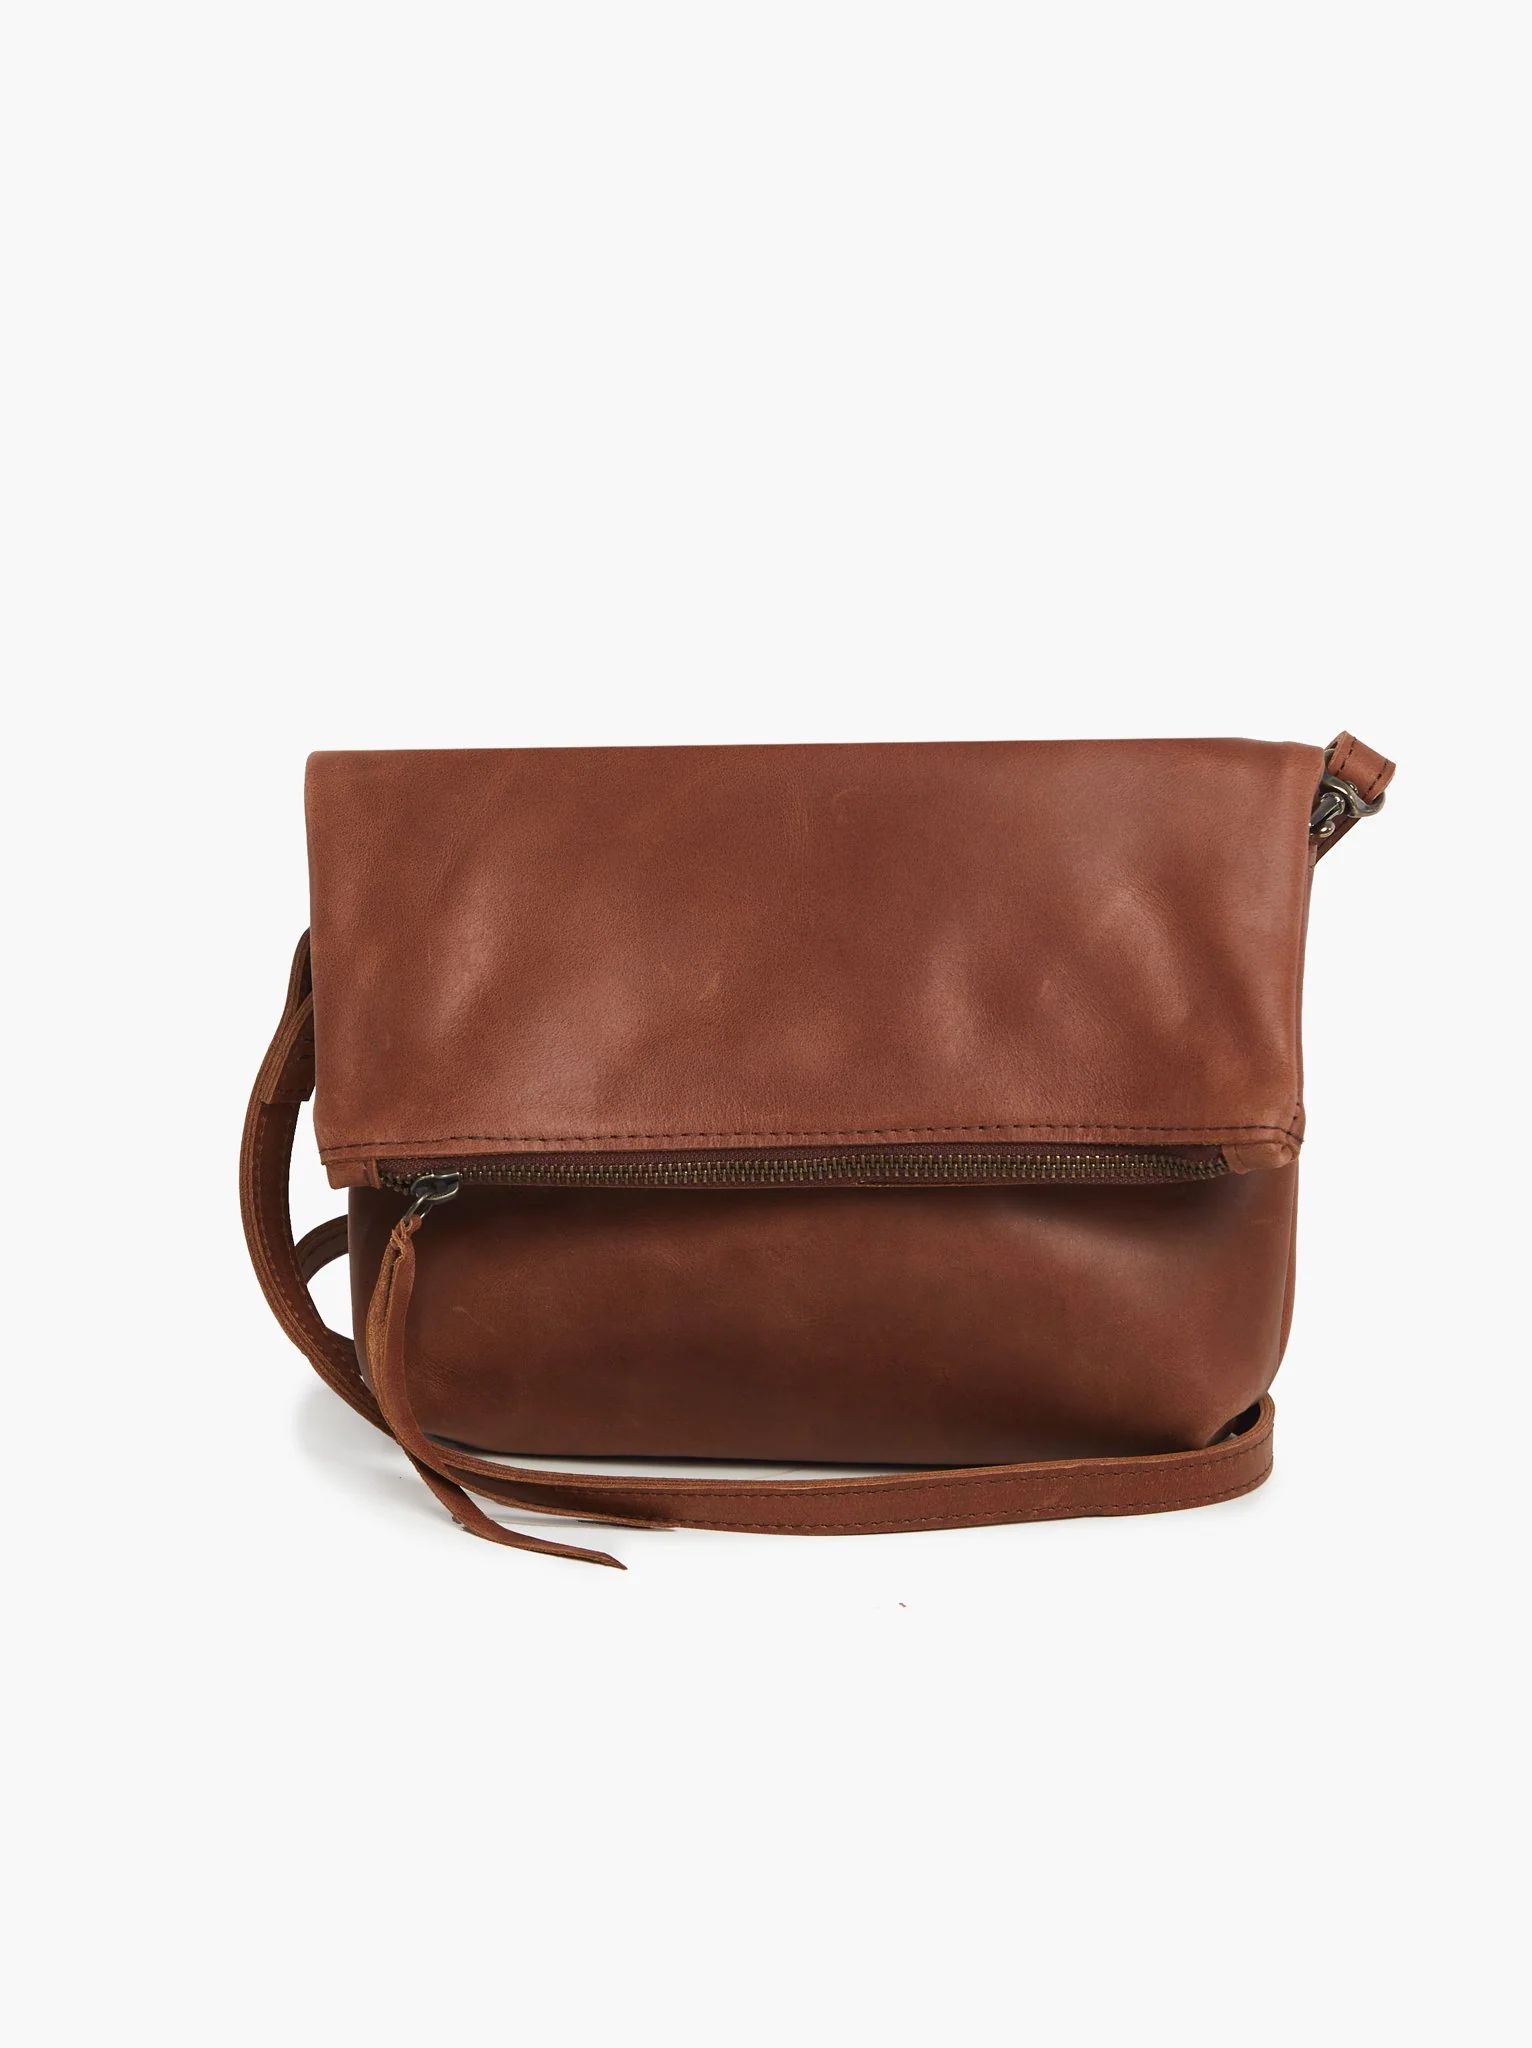 Emnet Foldover Crossbody | ABLE Clothing